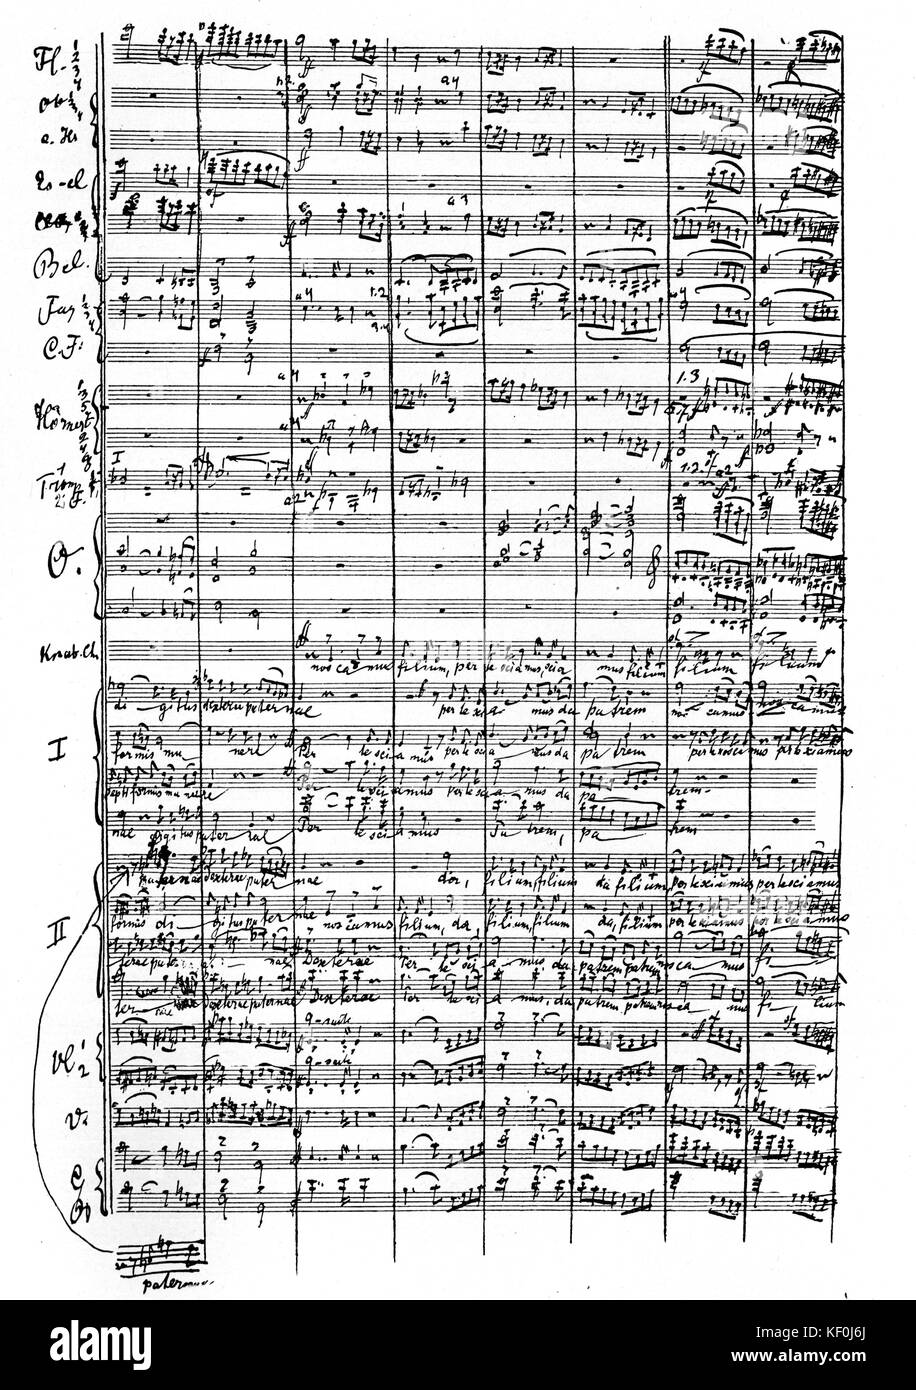 Gustav Mahler's   8th  Symphony manuscript score. In Mahler's hand. Austrian composer, 7 July 1860 - 18 May 1911. Known as Symphony of a Thousand because members of the orchestra, chorus and soloists totalled more than 1000. Austrian composer, 7 July 1860 - 18 May 1911 Stock Photo